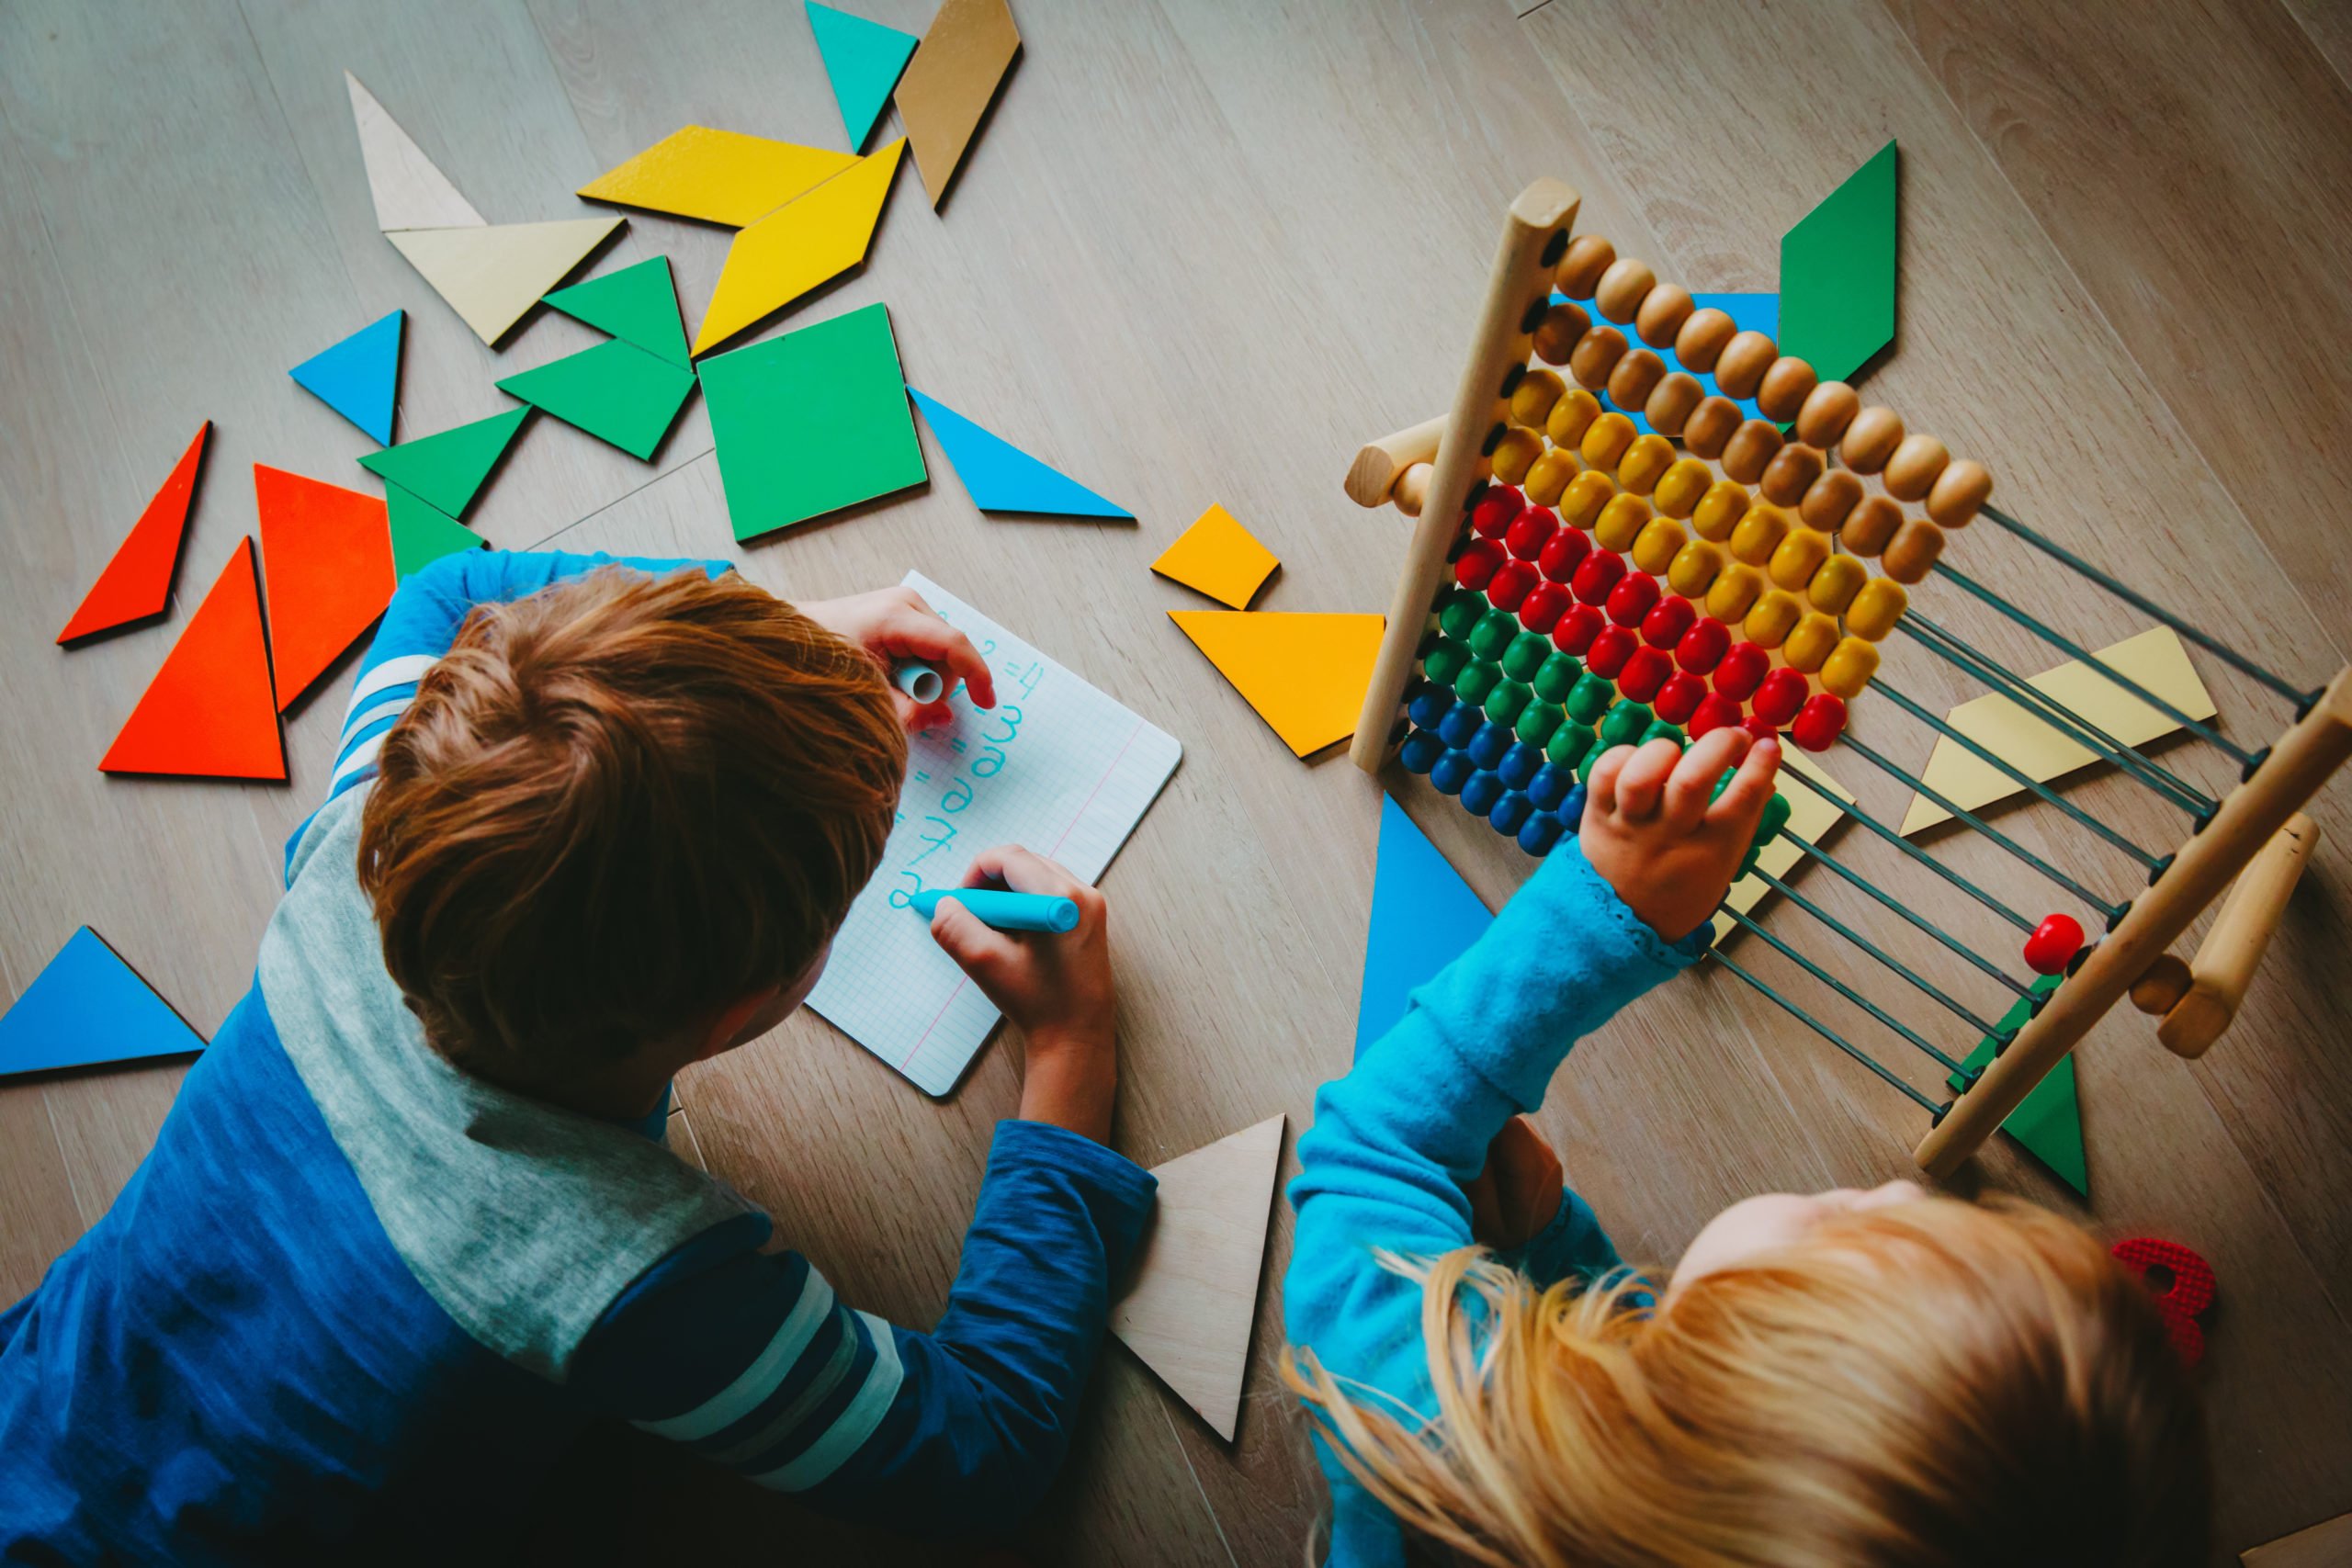 Help Your Child Develop Early Math Skills